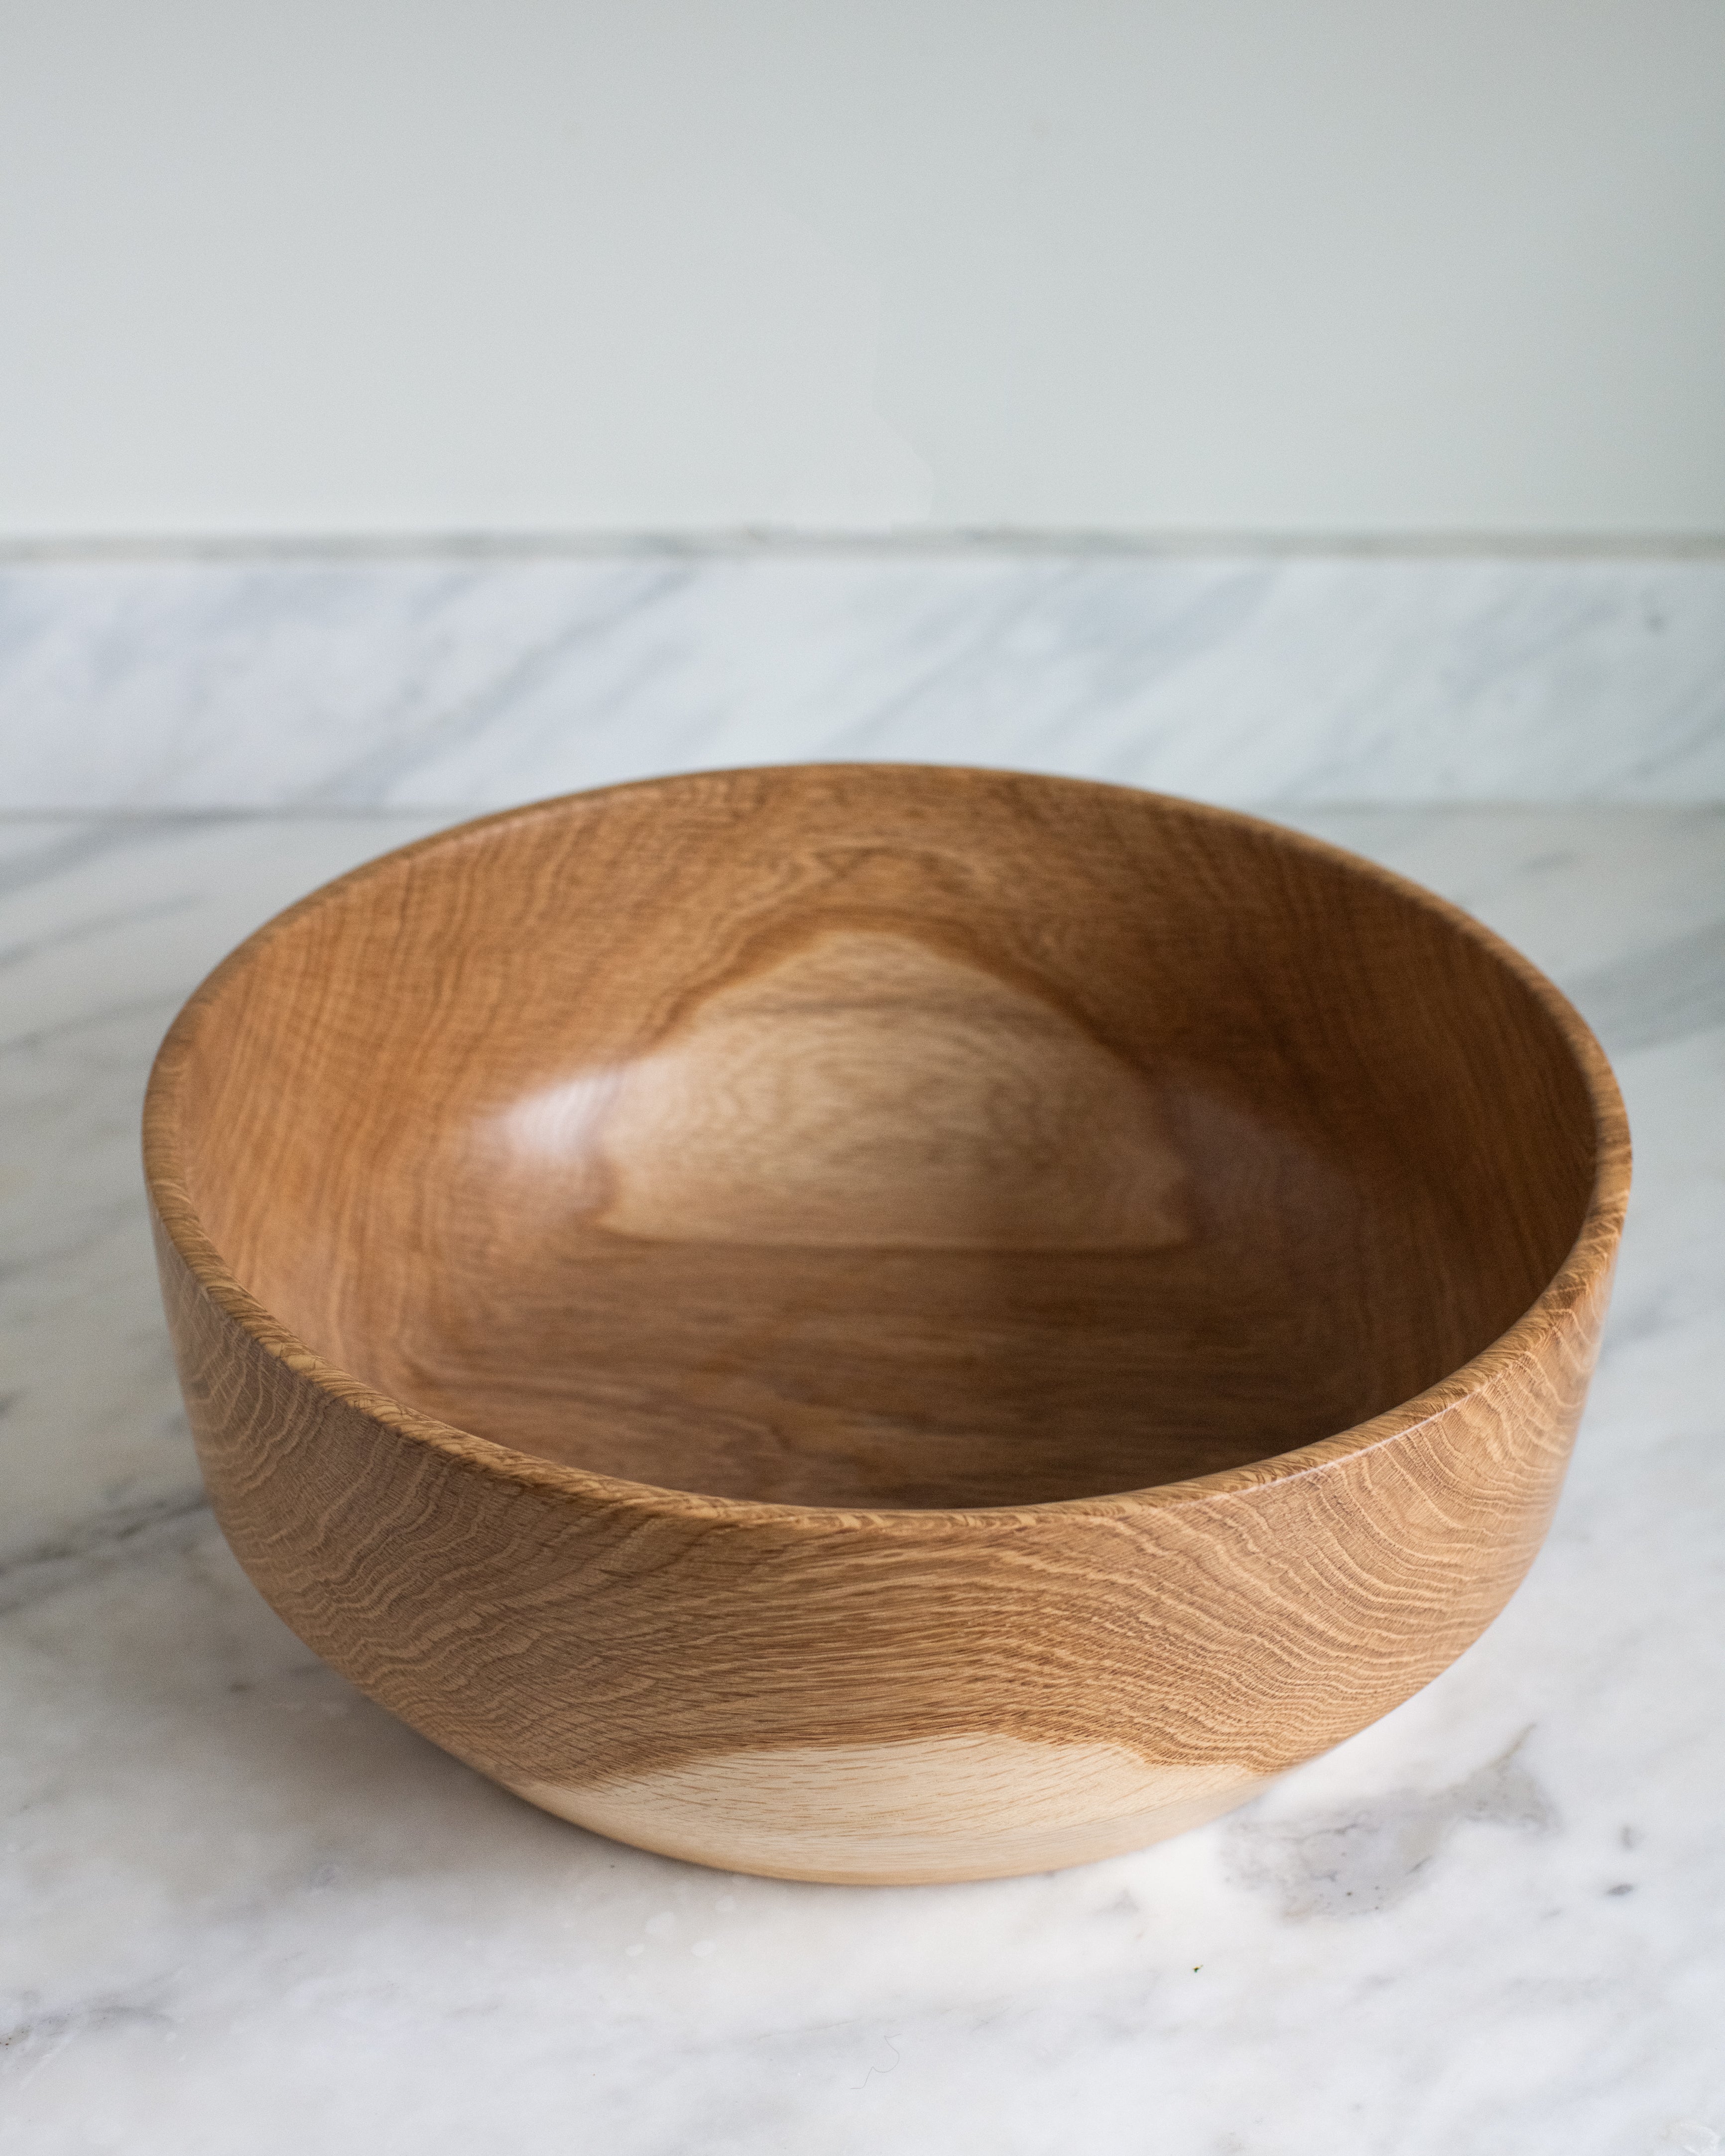 Nimmo Bay and Miller & Co. Wooden Bowl #4